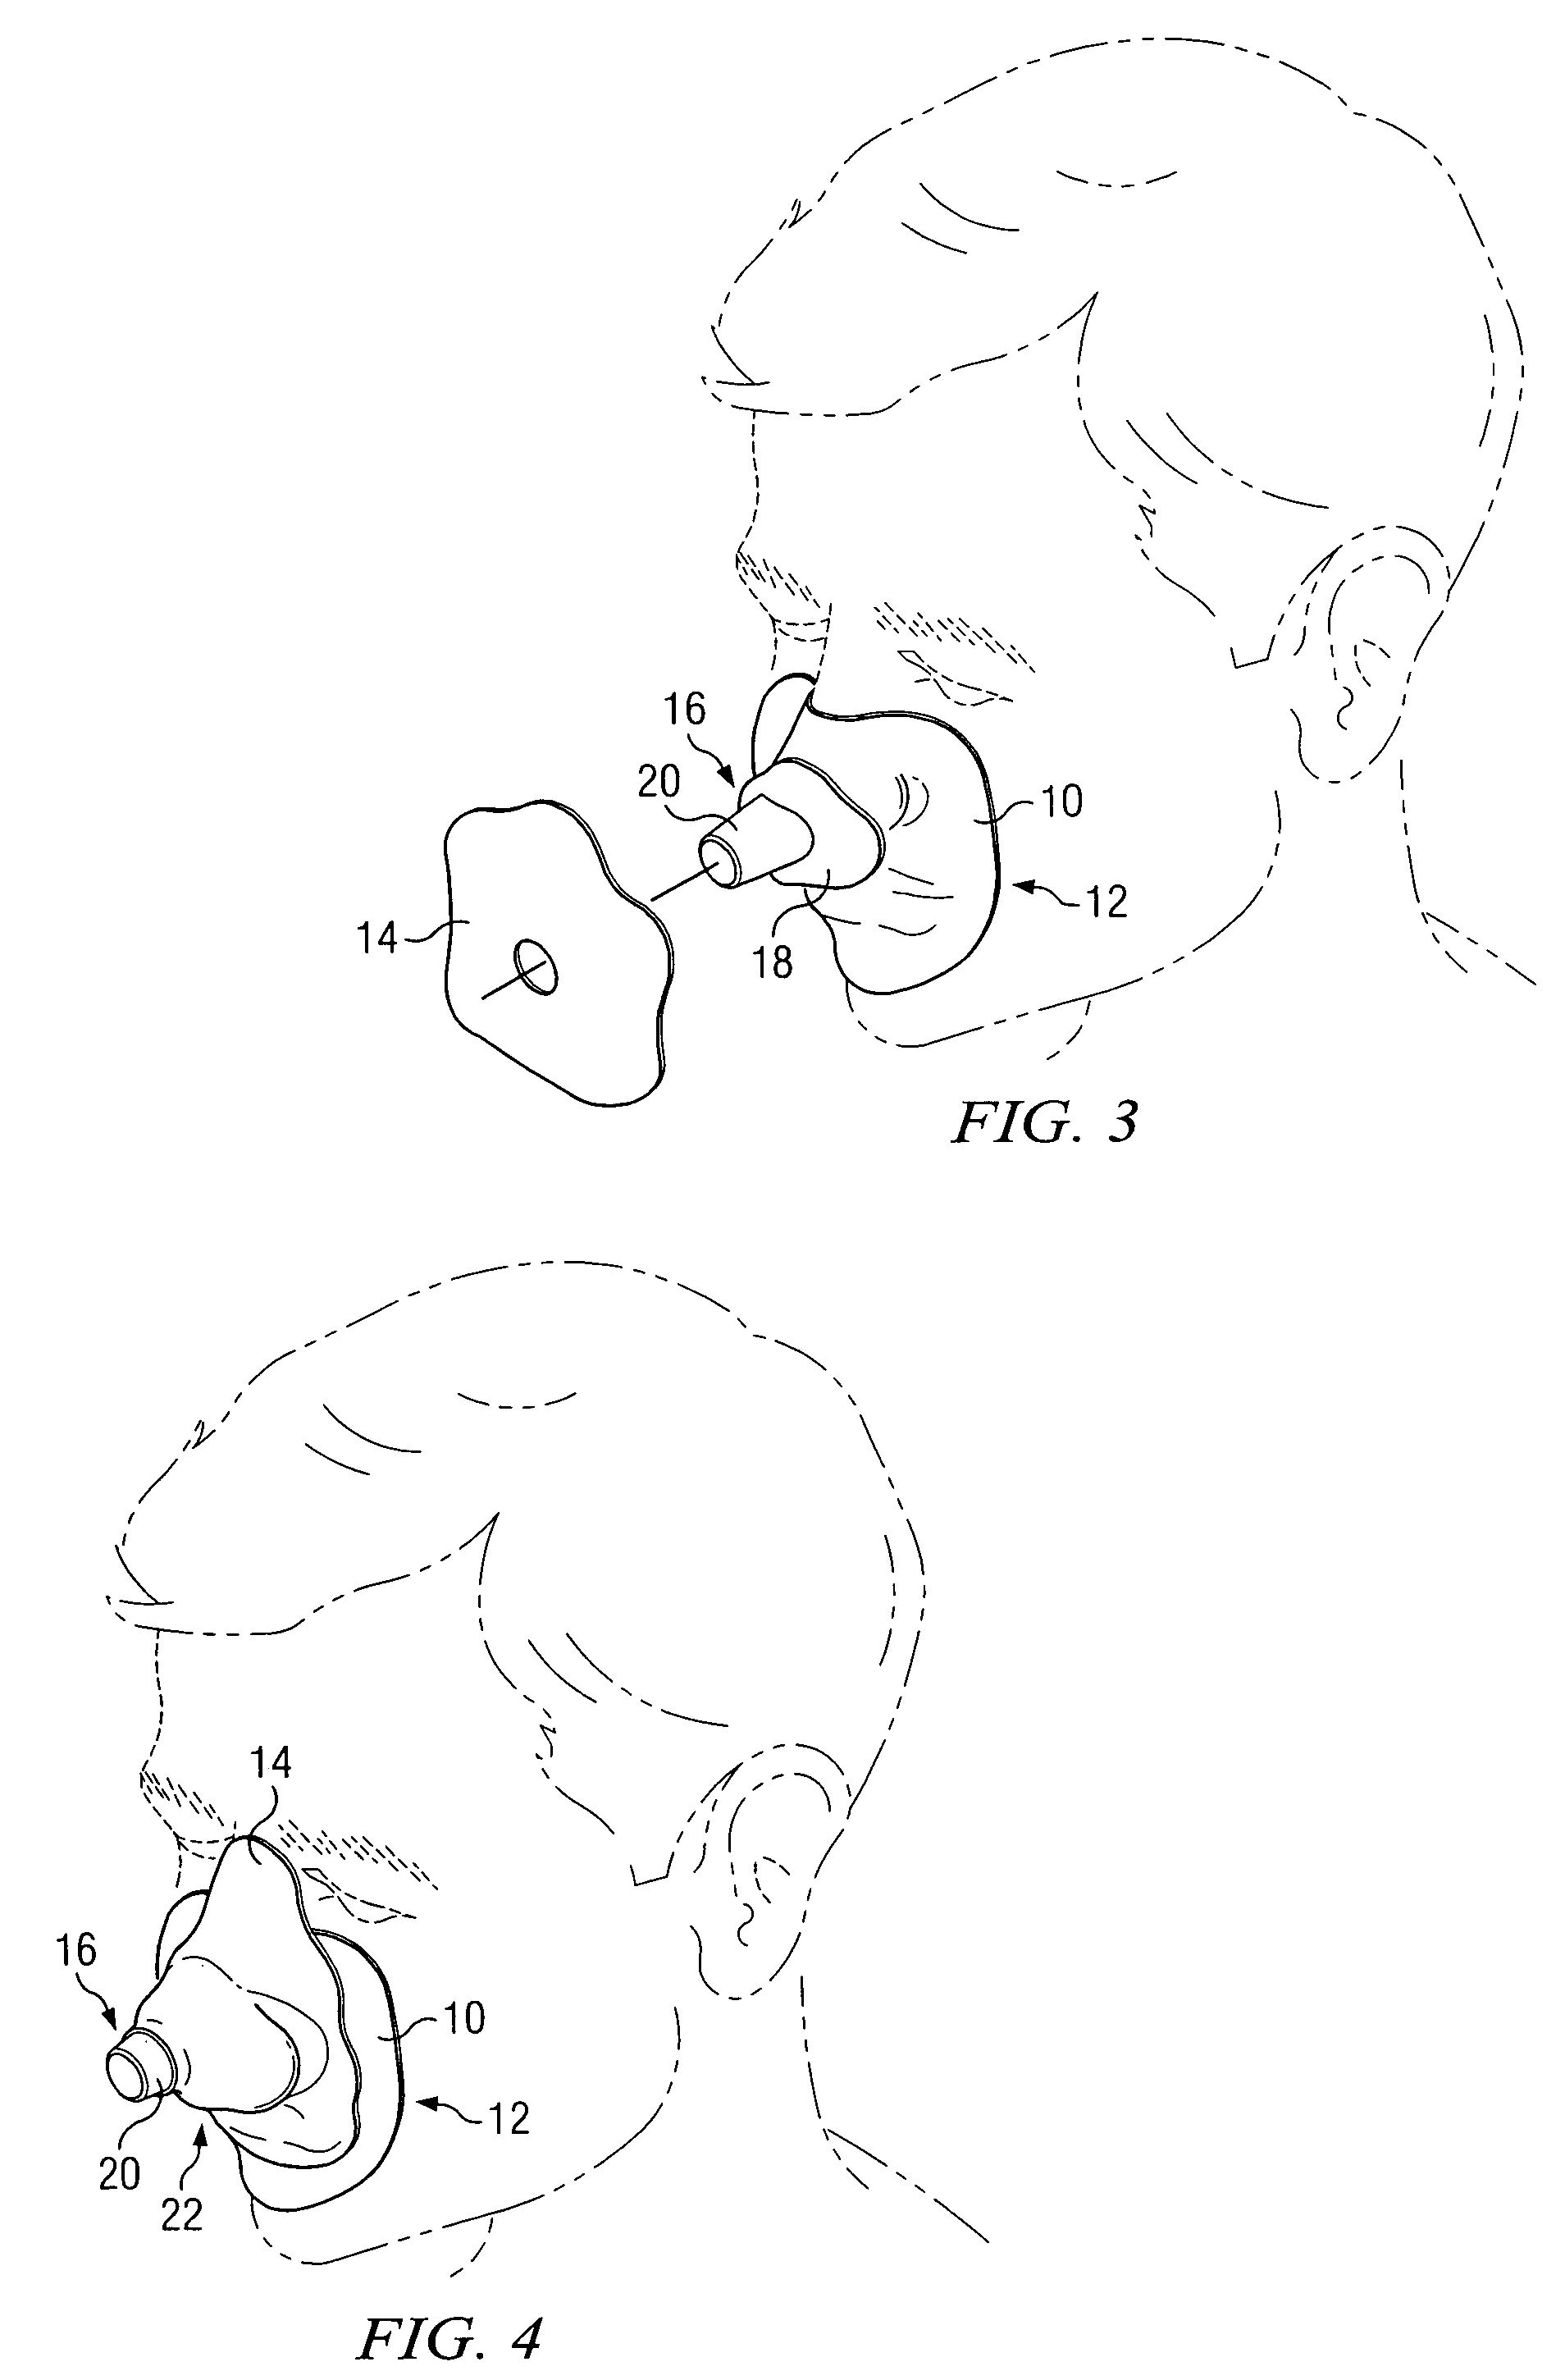 Custom fitted mask configured for coupling to an external gas supply system and method of forming same